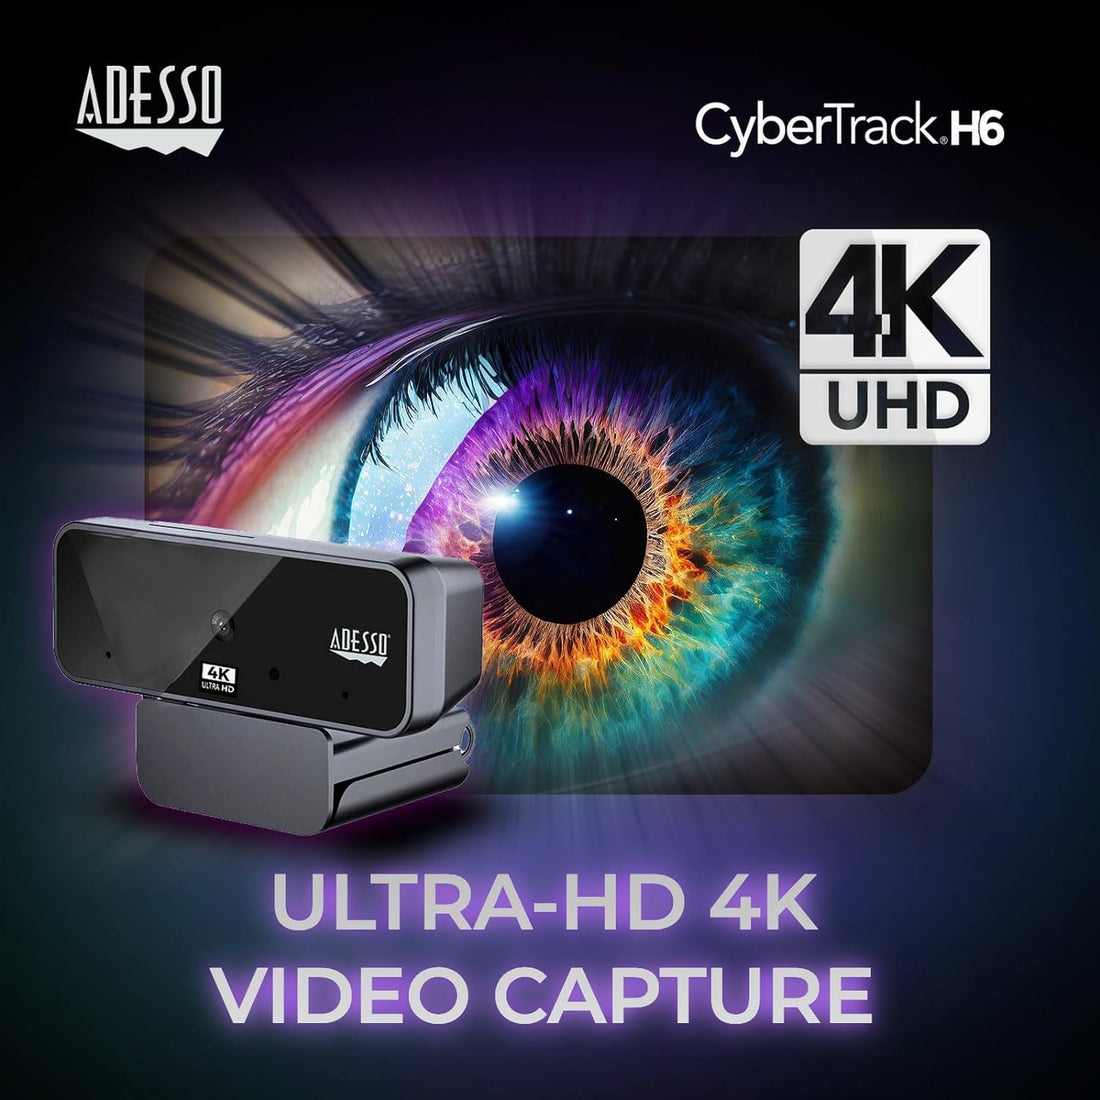 Adesso Cybertrack H6 4K Ultra HD USB Webcam with Built-in Dual Microphone & Privacy Shutter Cover, Black